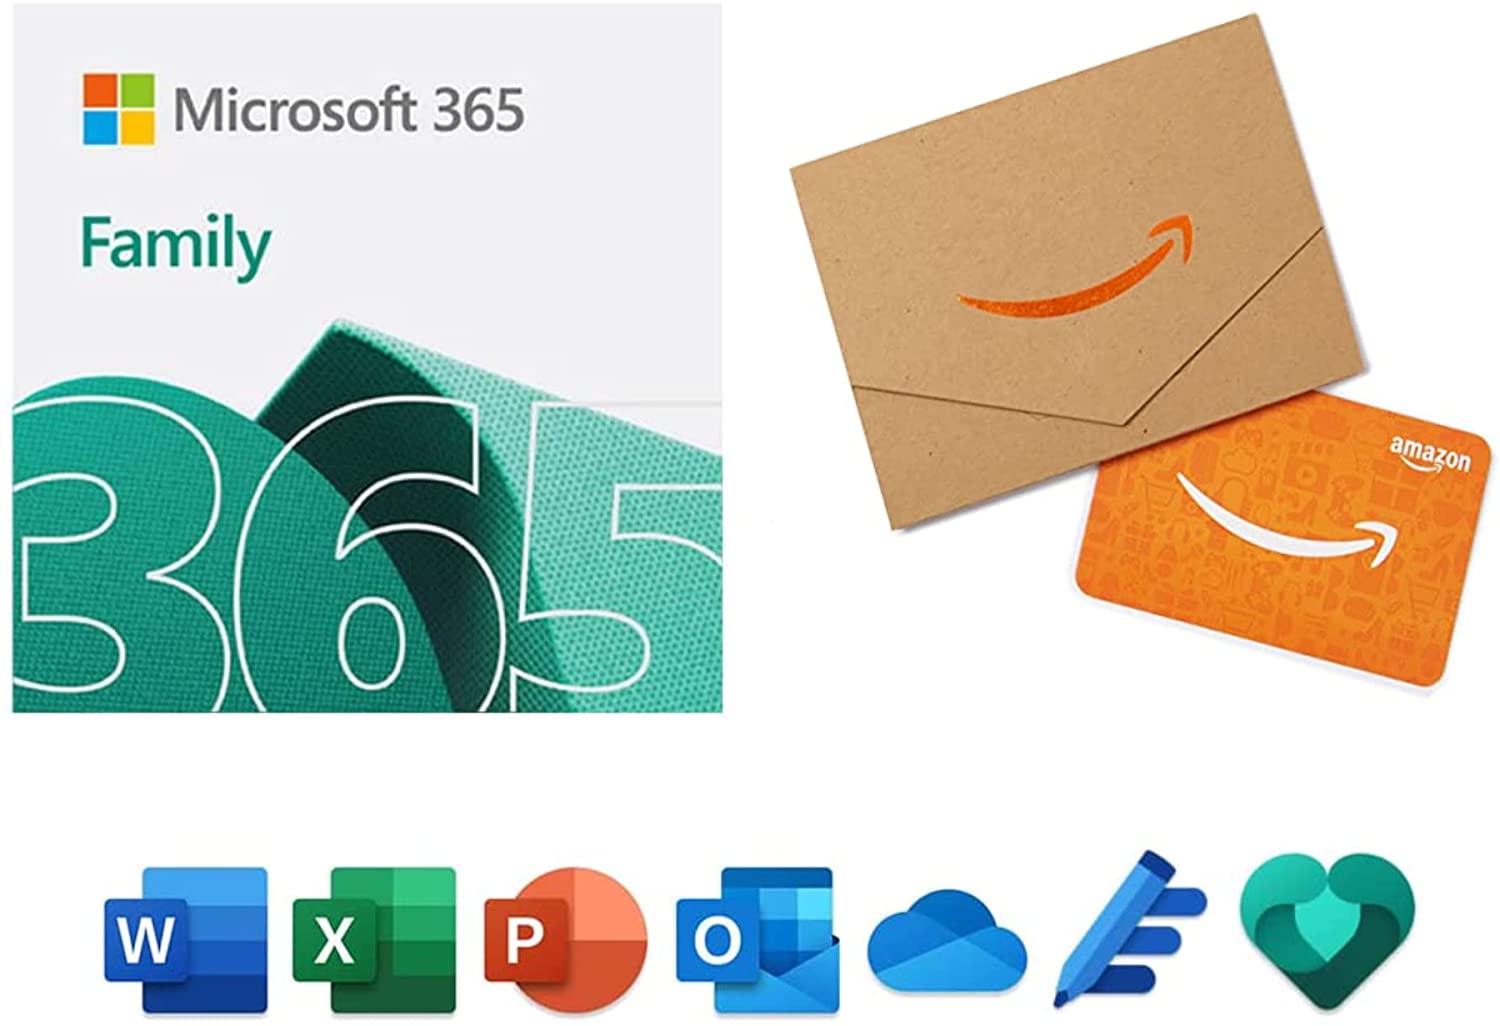 This is an absolutely AMAZING offer over at Amazon TODAY ONLY! Regularly $149.99 USD, you can snag a Microsoft Office 365 Family subscription PLUS a $50 USD Amazon Gift Card for just $99.99 USD! 